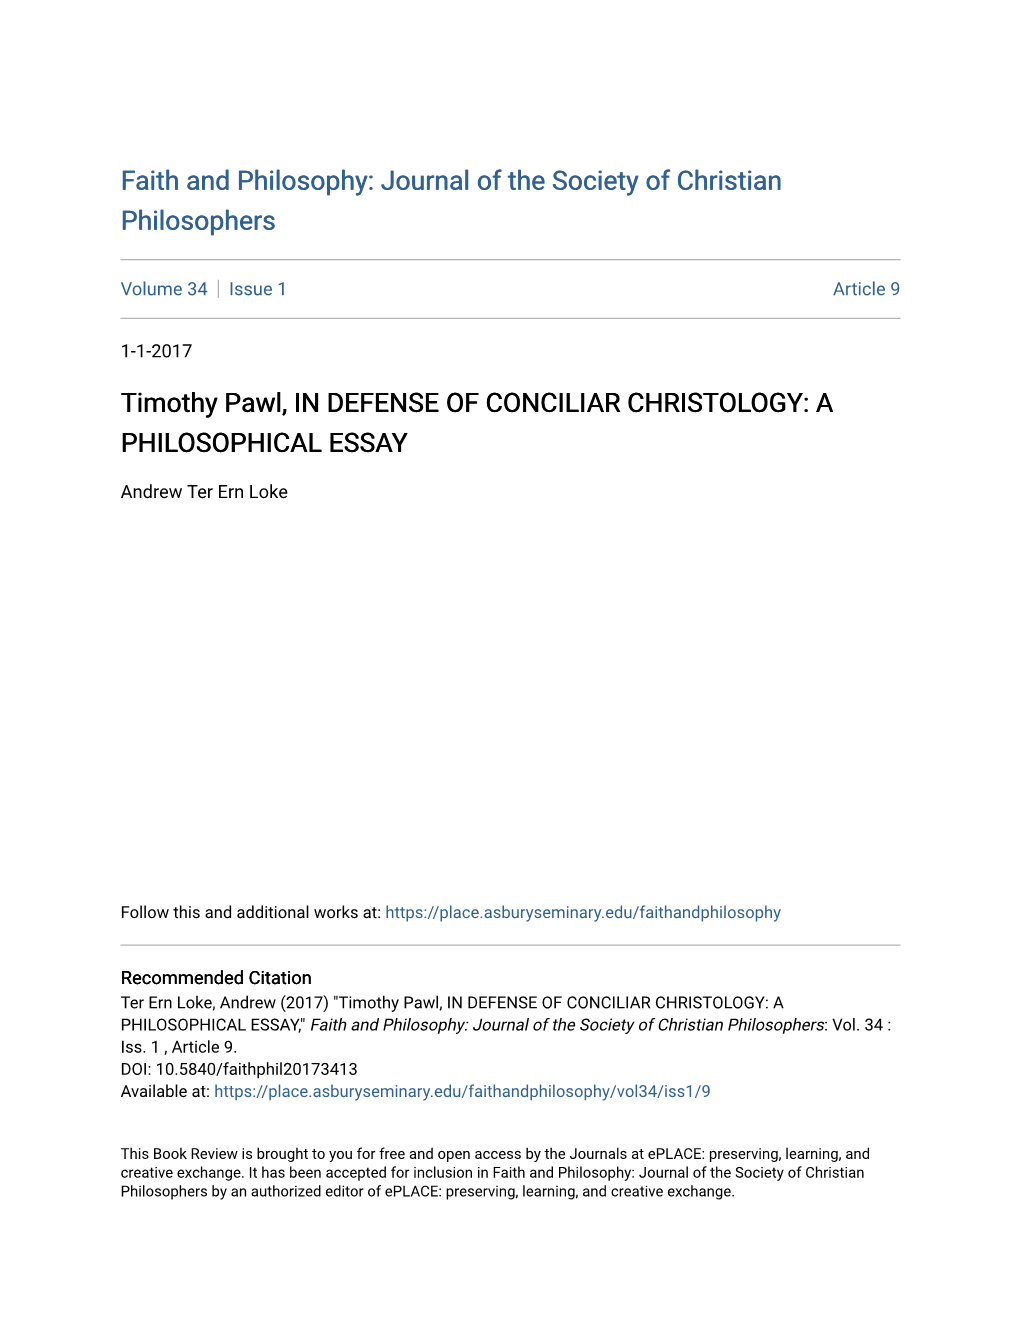 Timothy Pawl, in DEFENSE of CONCILIAR CHRISTOLOGY: a PHILOSOPHICAL ESSAY